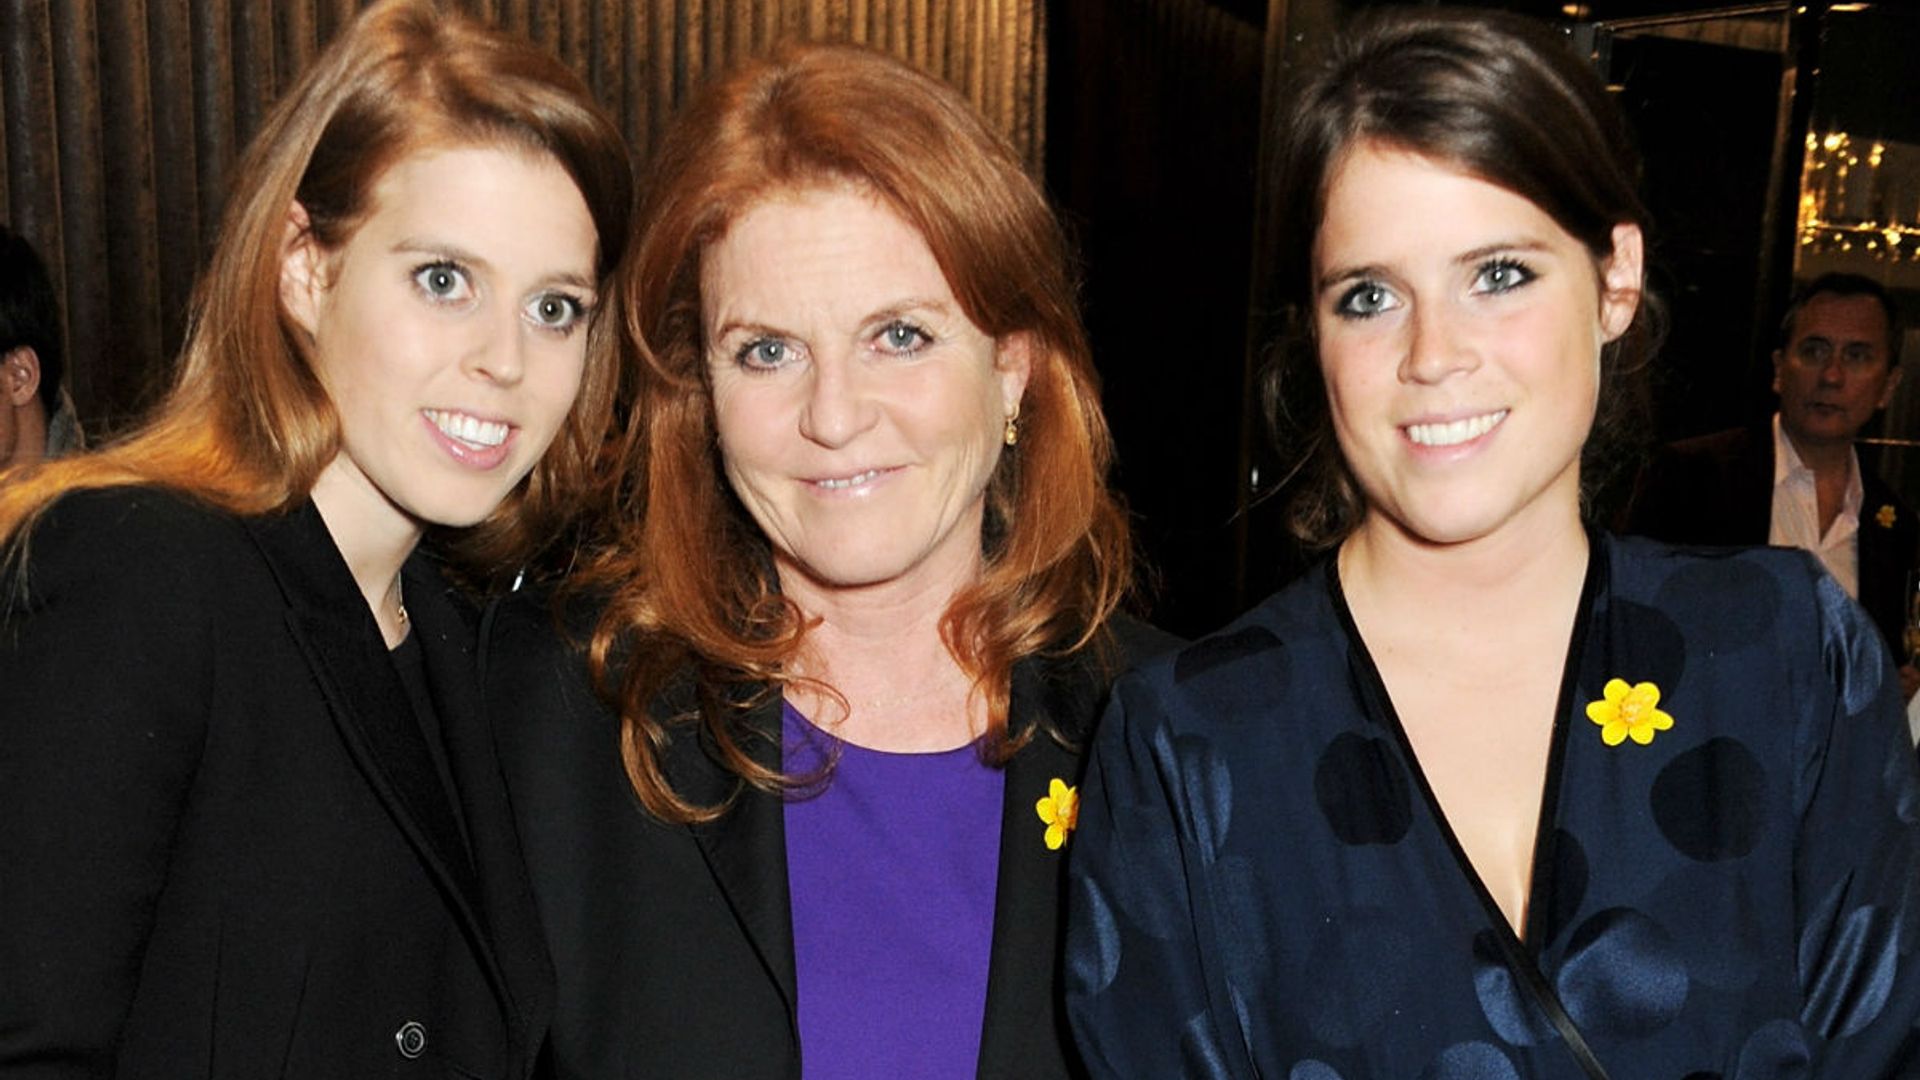 Princess Eugenie reveals news about Sarah Ferguson that many didn't know